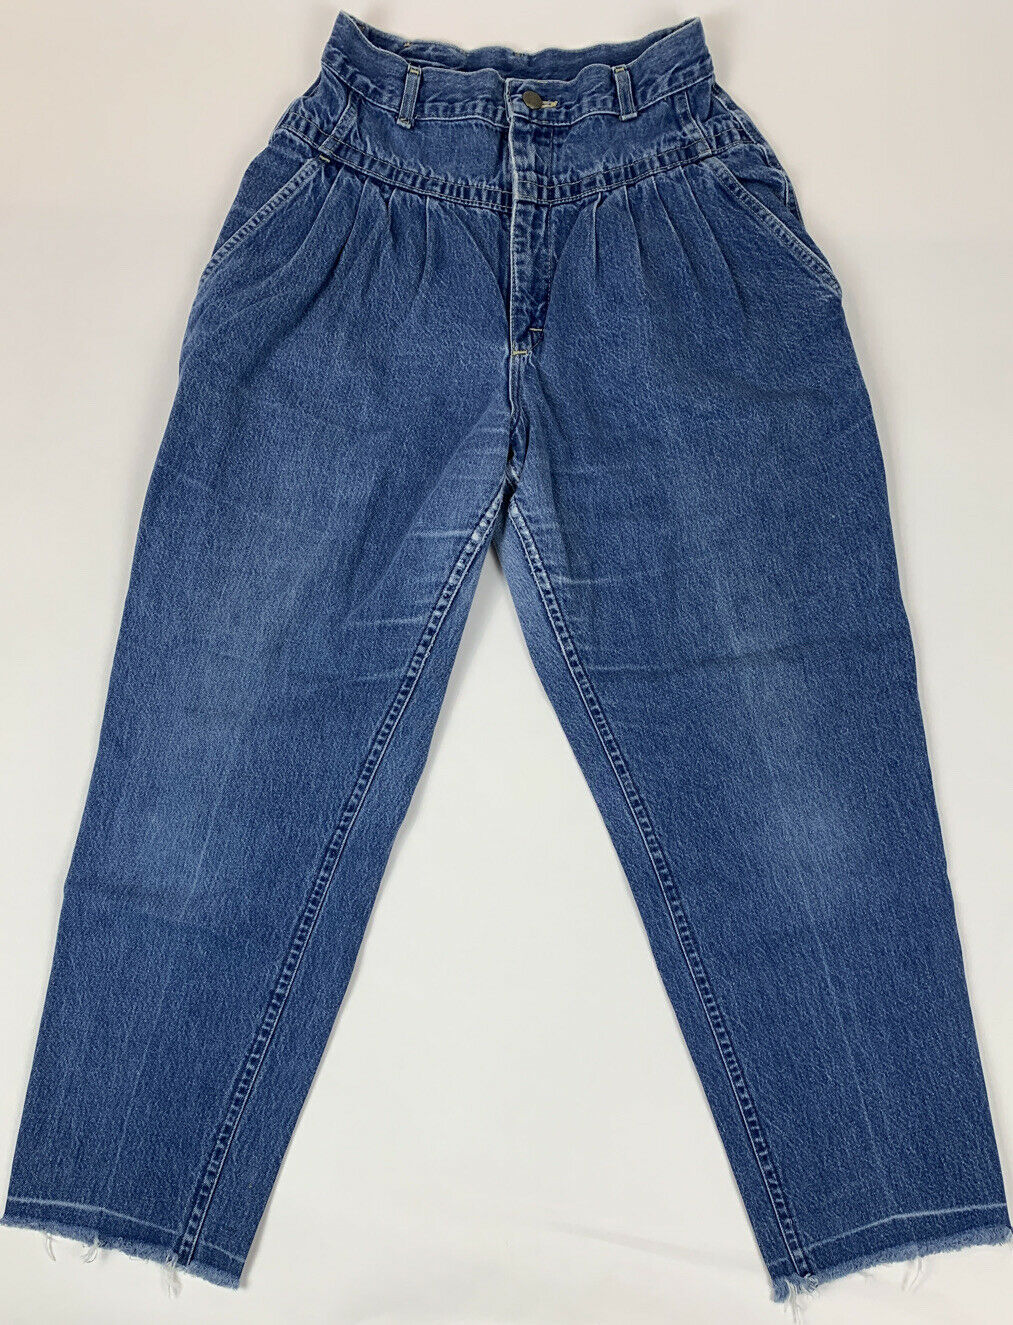 Vtg 90’s Lee Womens Jeans High Rise Pleated Tapered Leg Usa Made Sz 12m 27 X 26